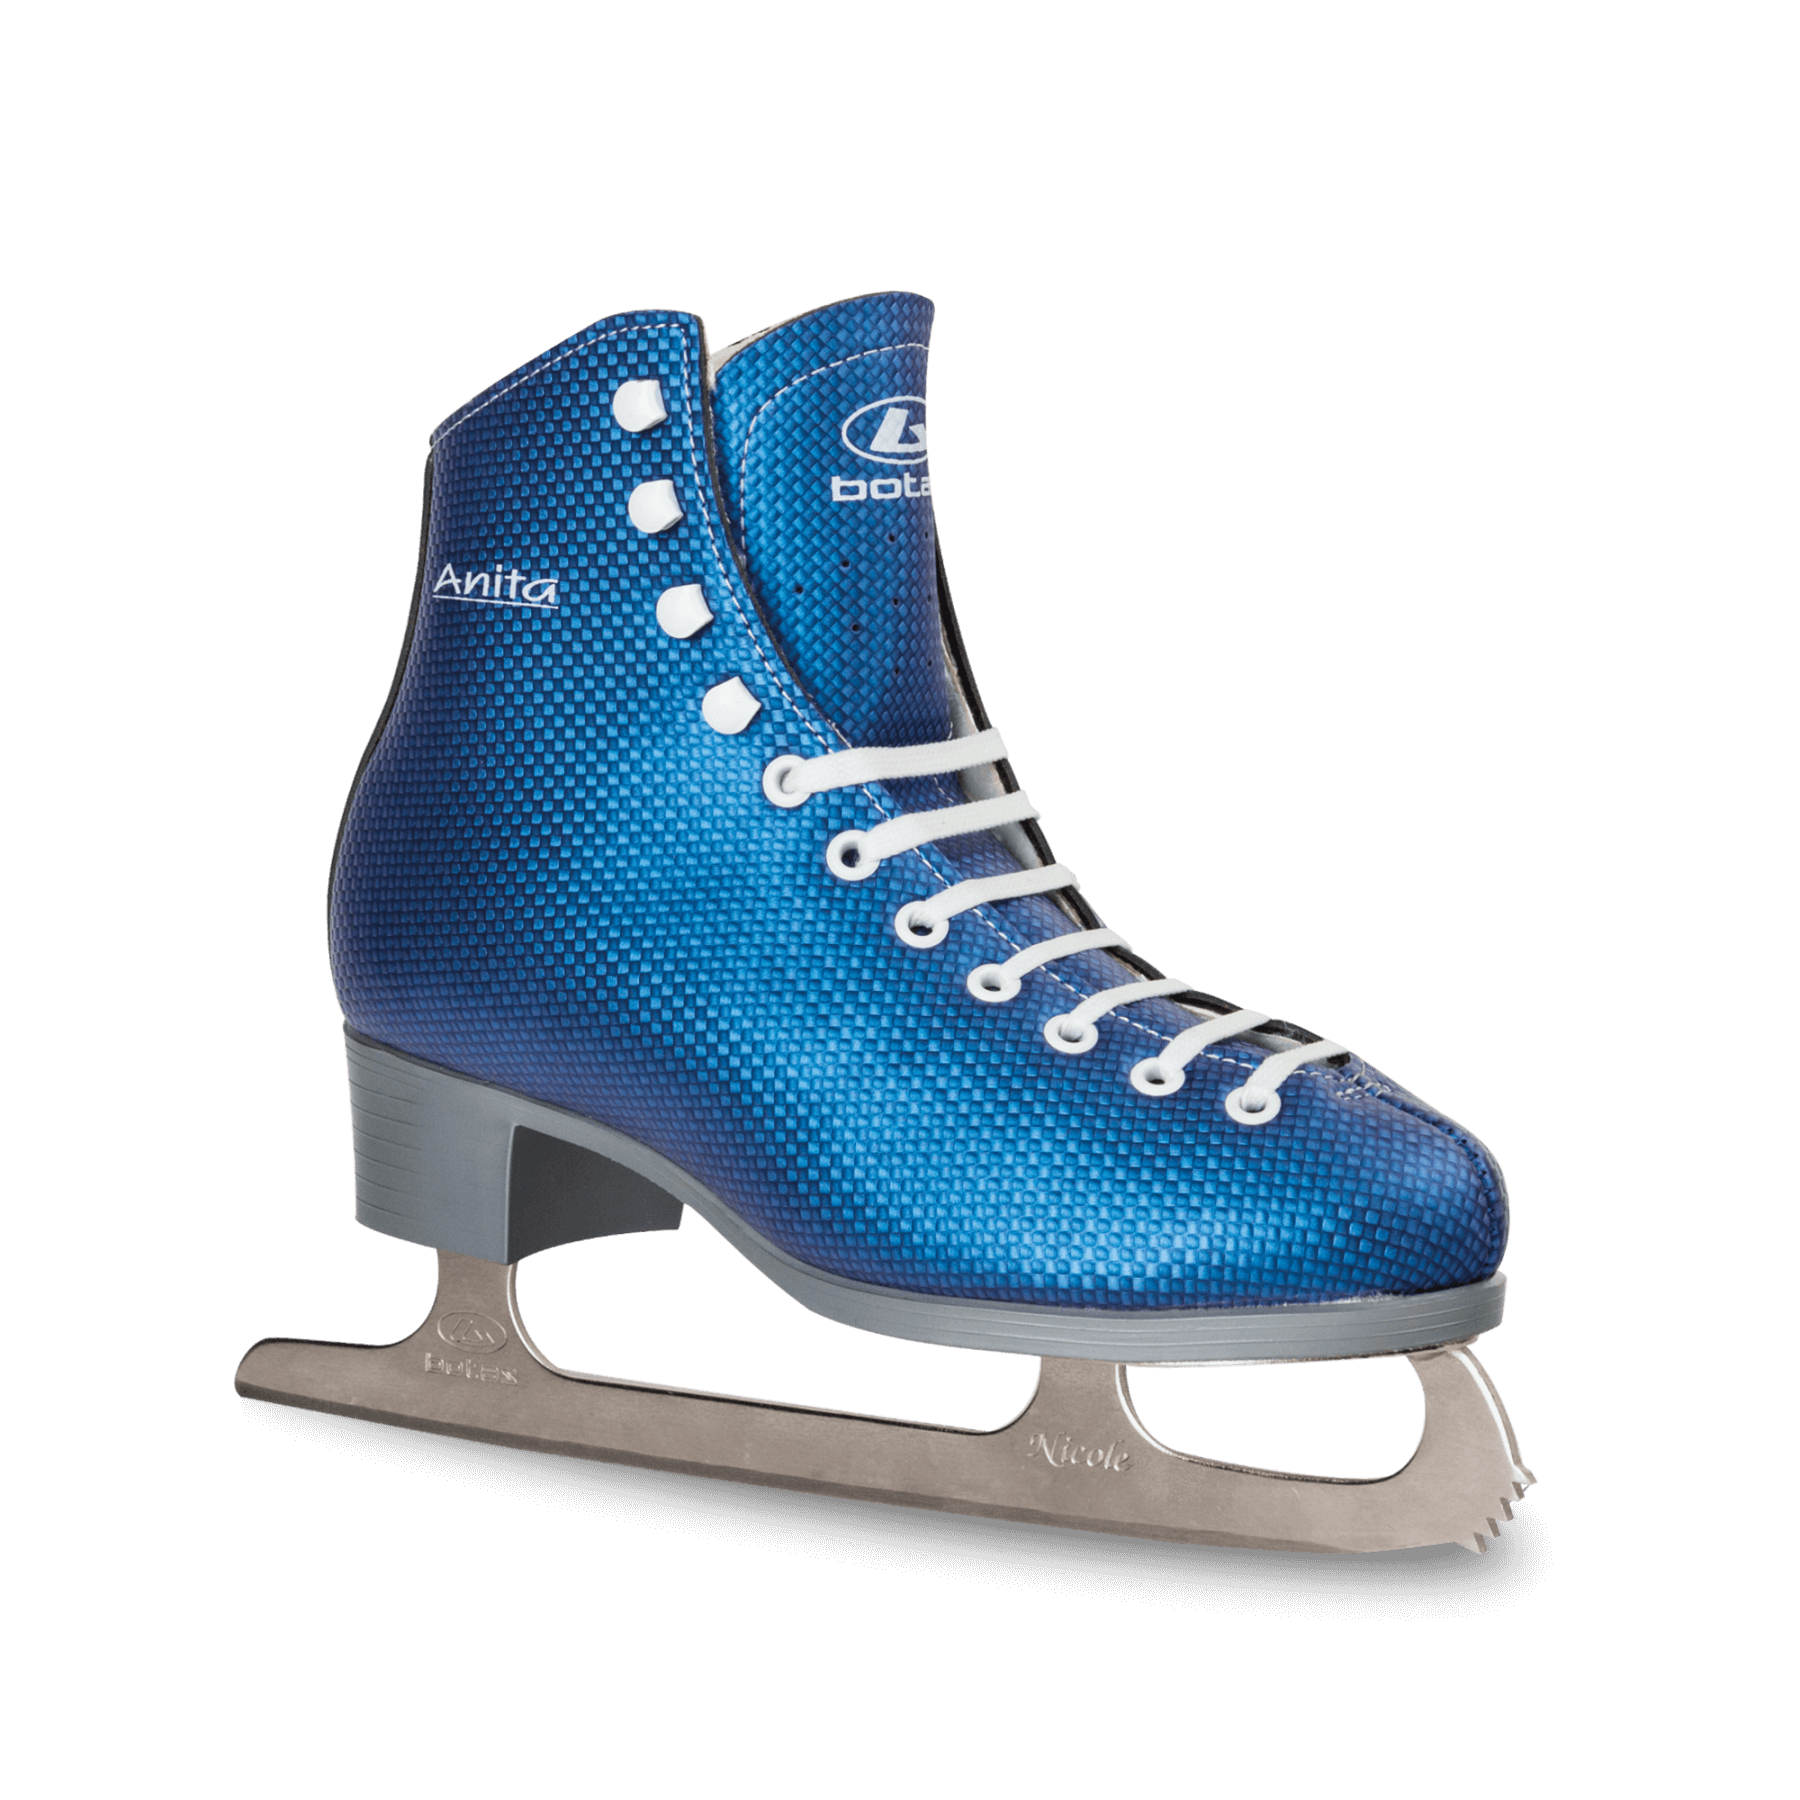 Ice Skating Shoes Image PNG Download Free PNG Image